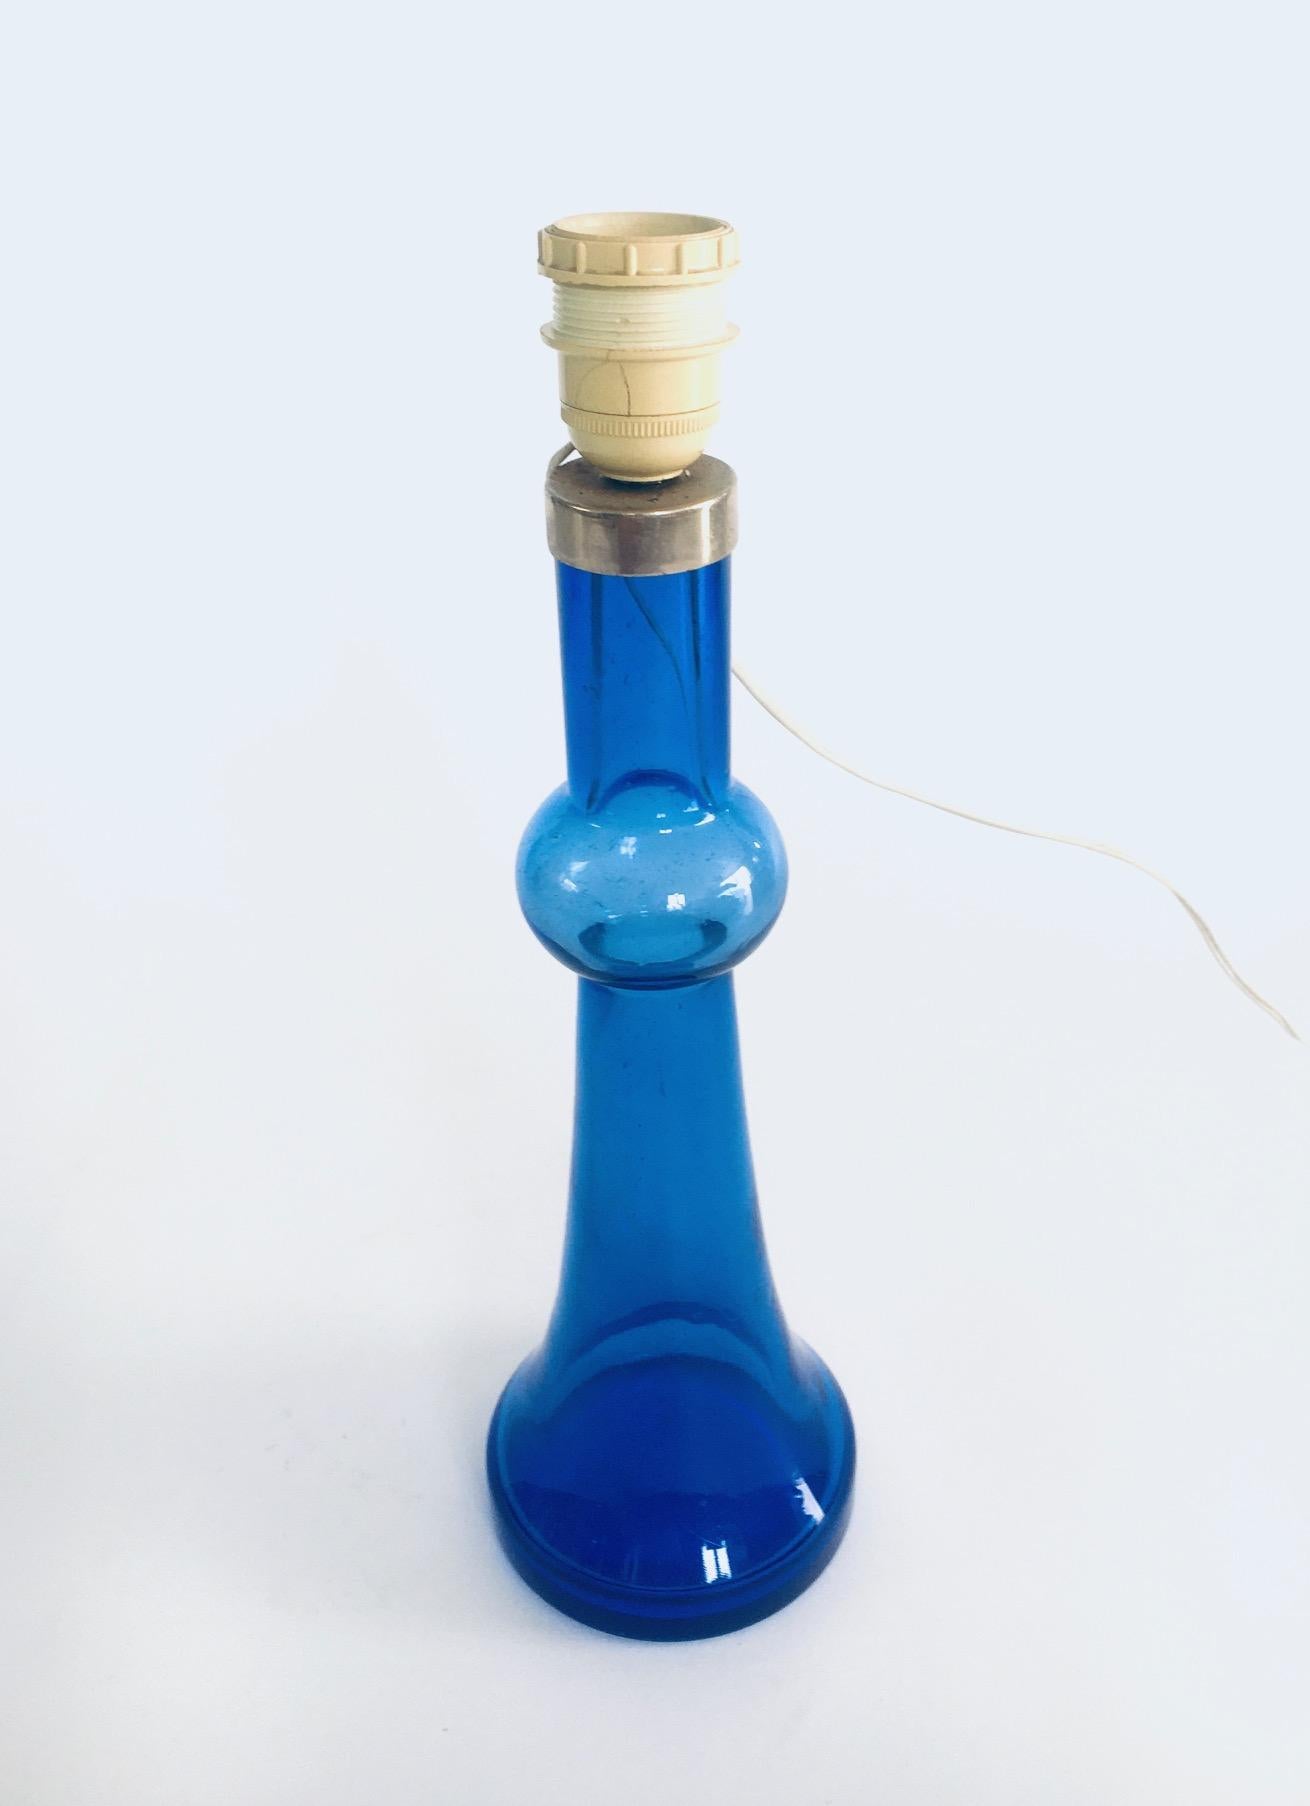 Dutch Midcentury Design Blue Glass Table Lamp by Nanny Still for Raak, 1960's For Sale